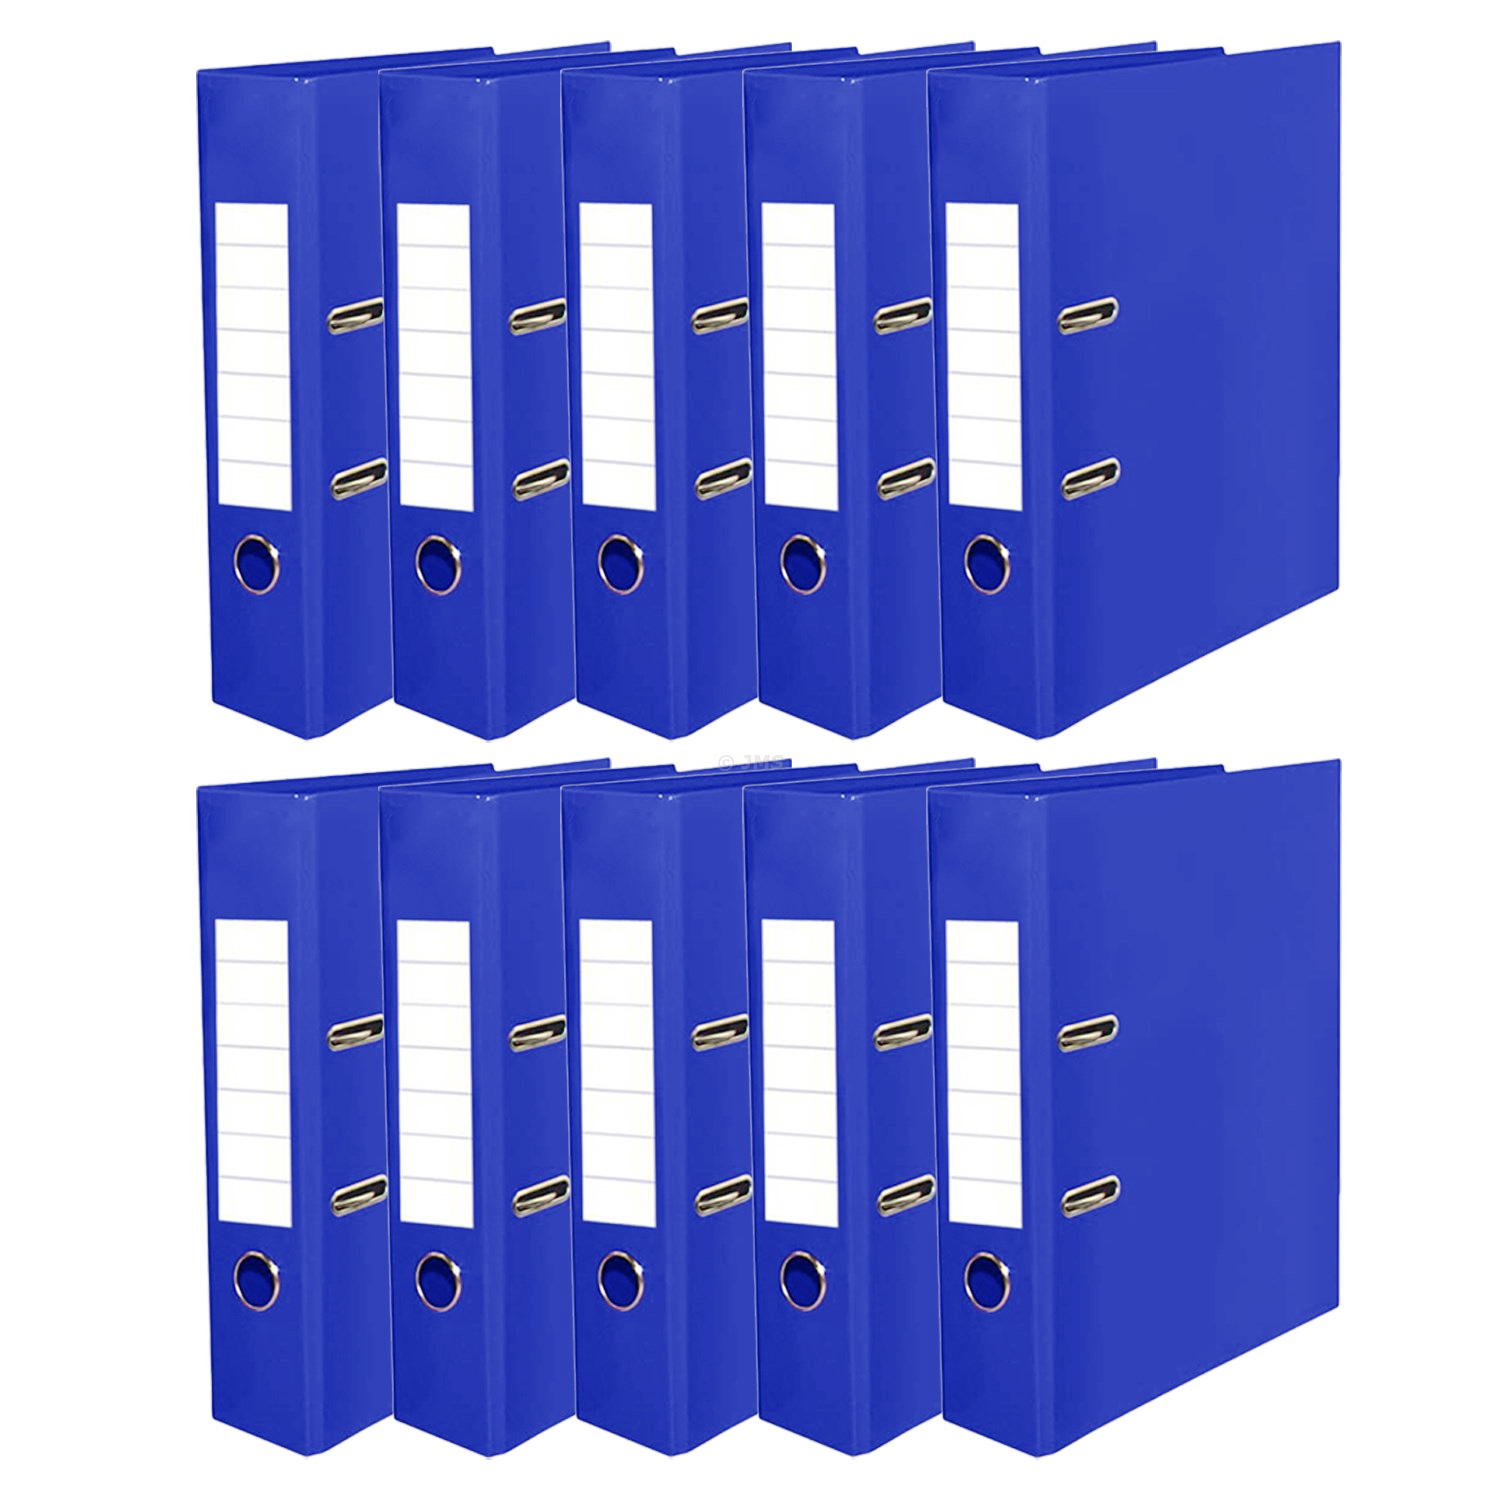 10 x A4 Lever Arch File Blue 75mm Label Spine Thumb Hole Document Storage Home School Office Hospital